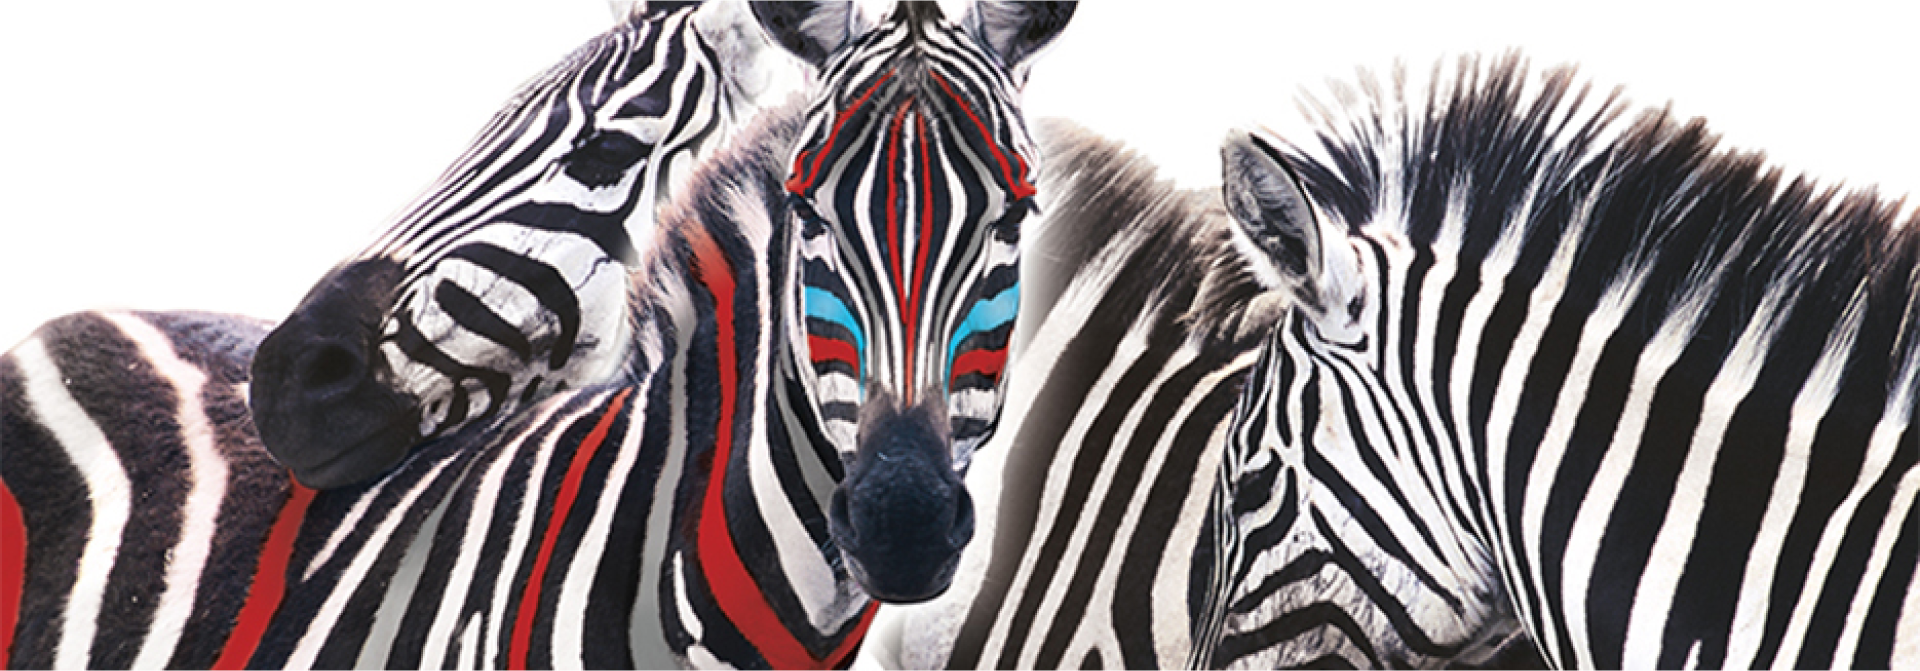 Three zebras with different colors on their faces are standing next to each other on a white background.